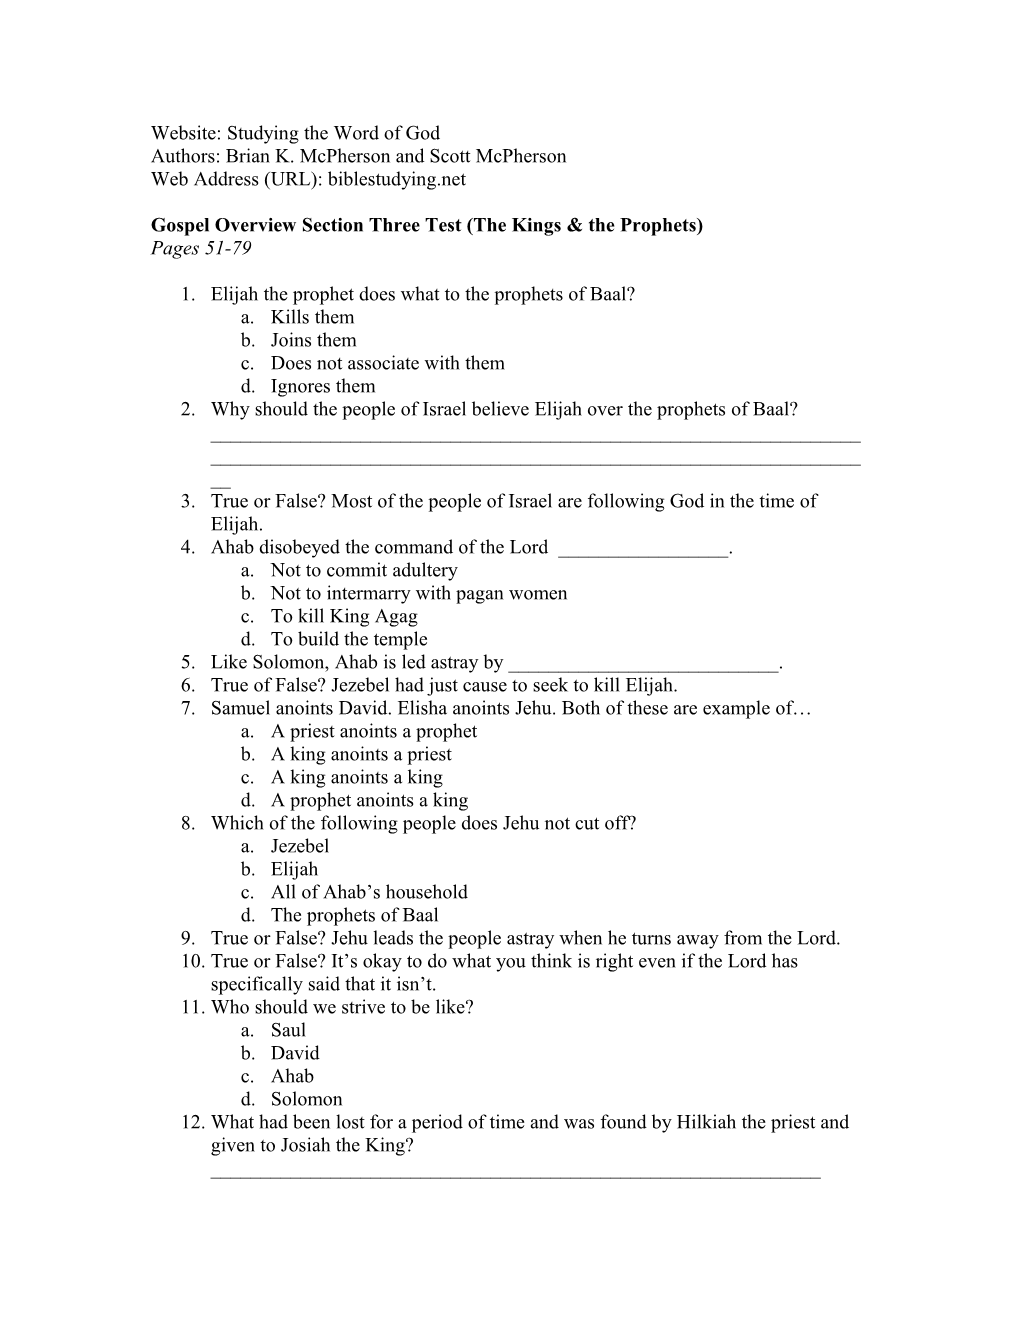 Gospel Overview Section Three Test (The Kings & the Prophets)